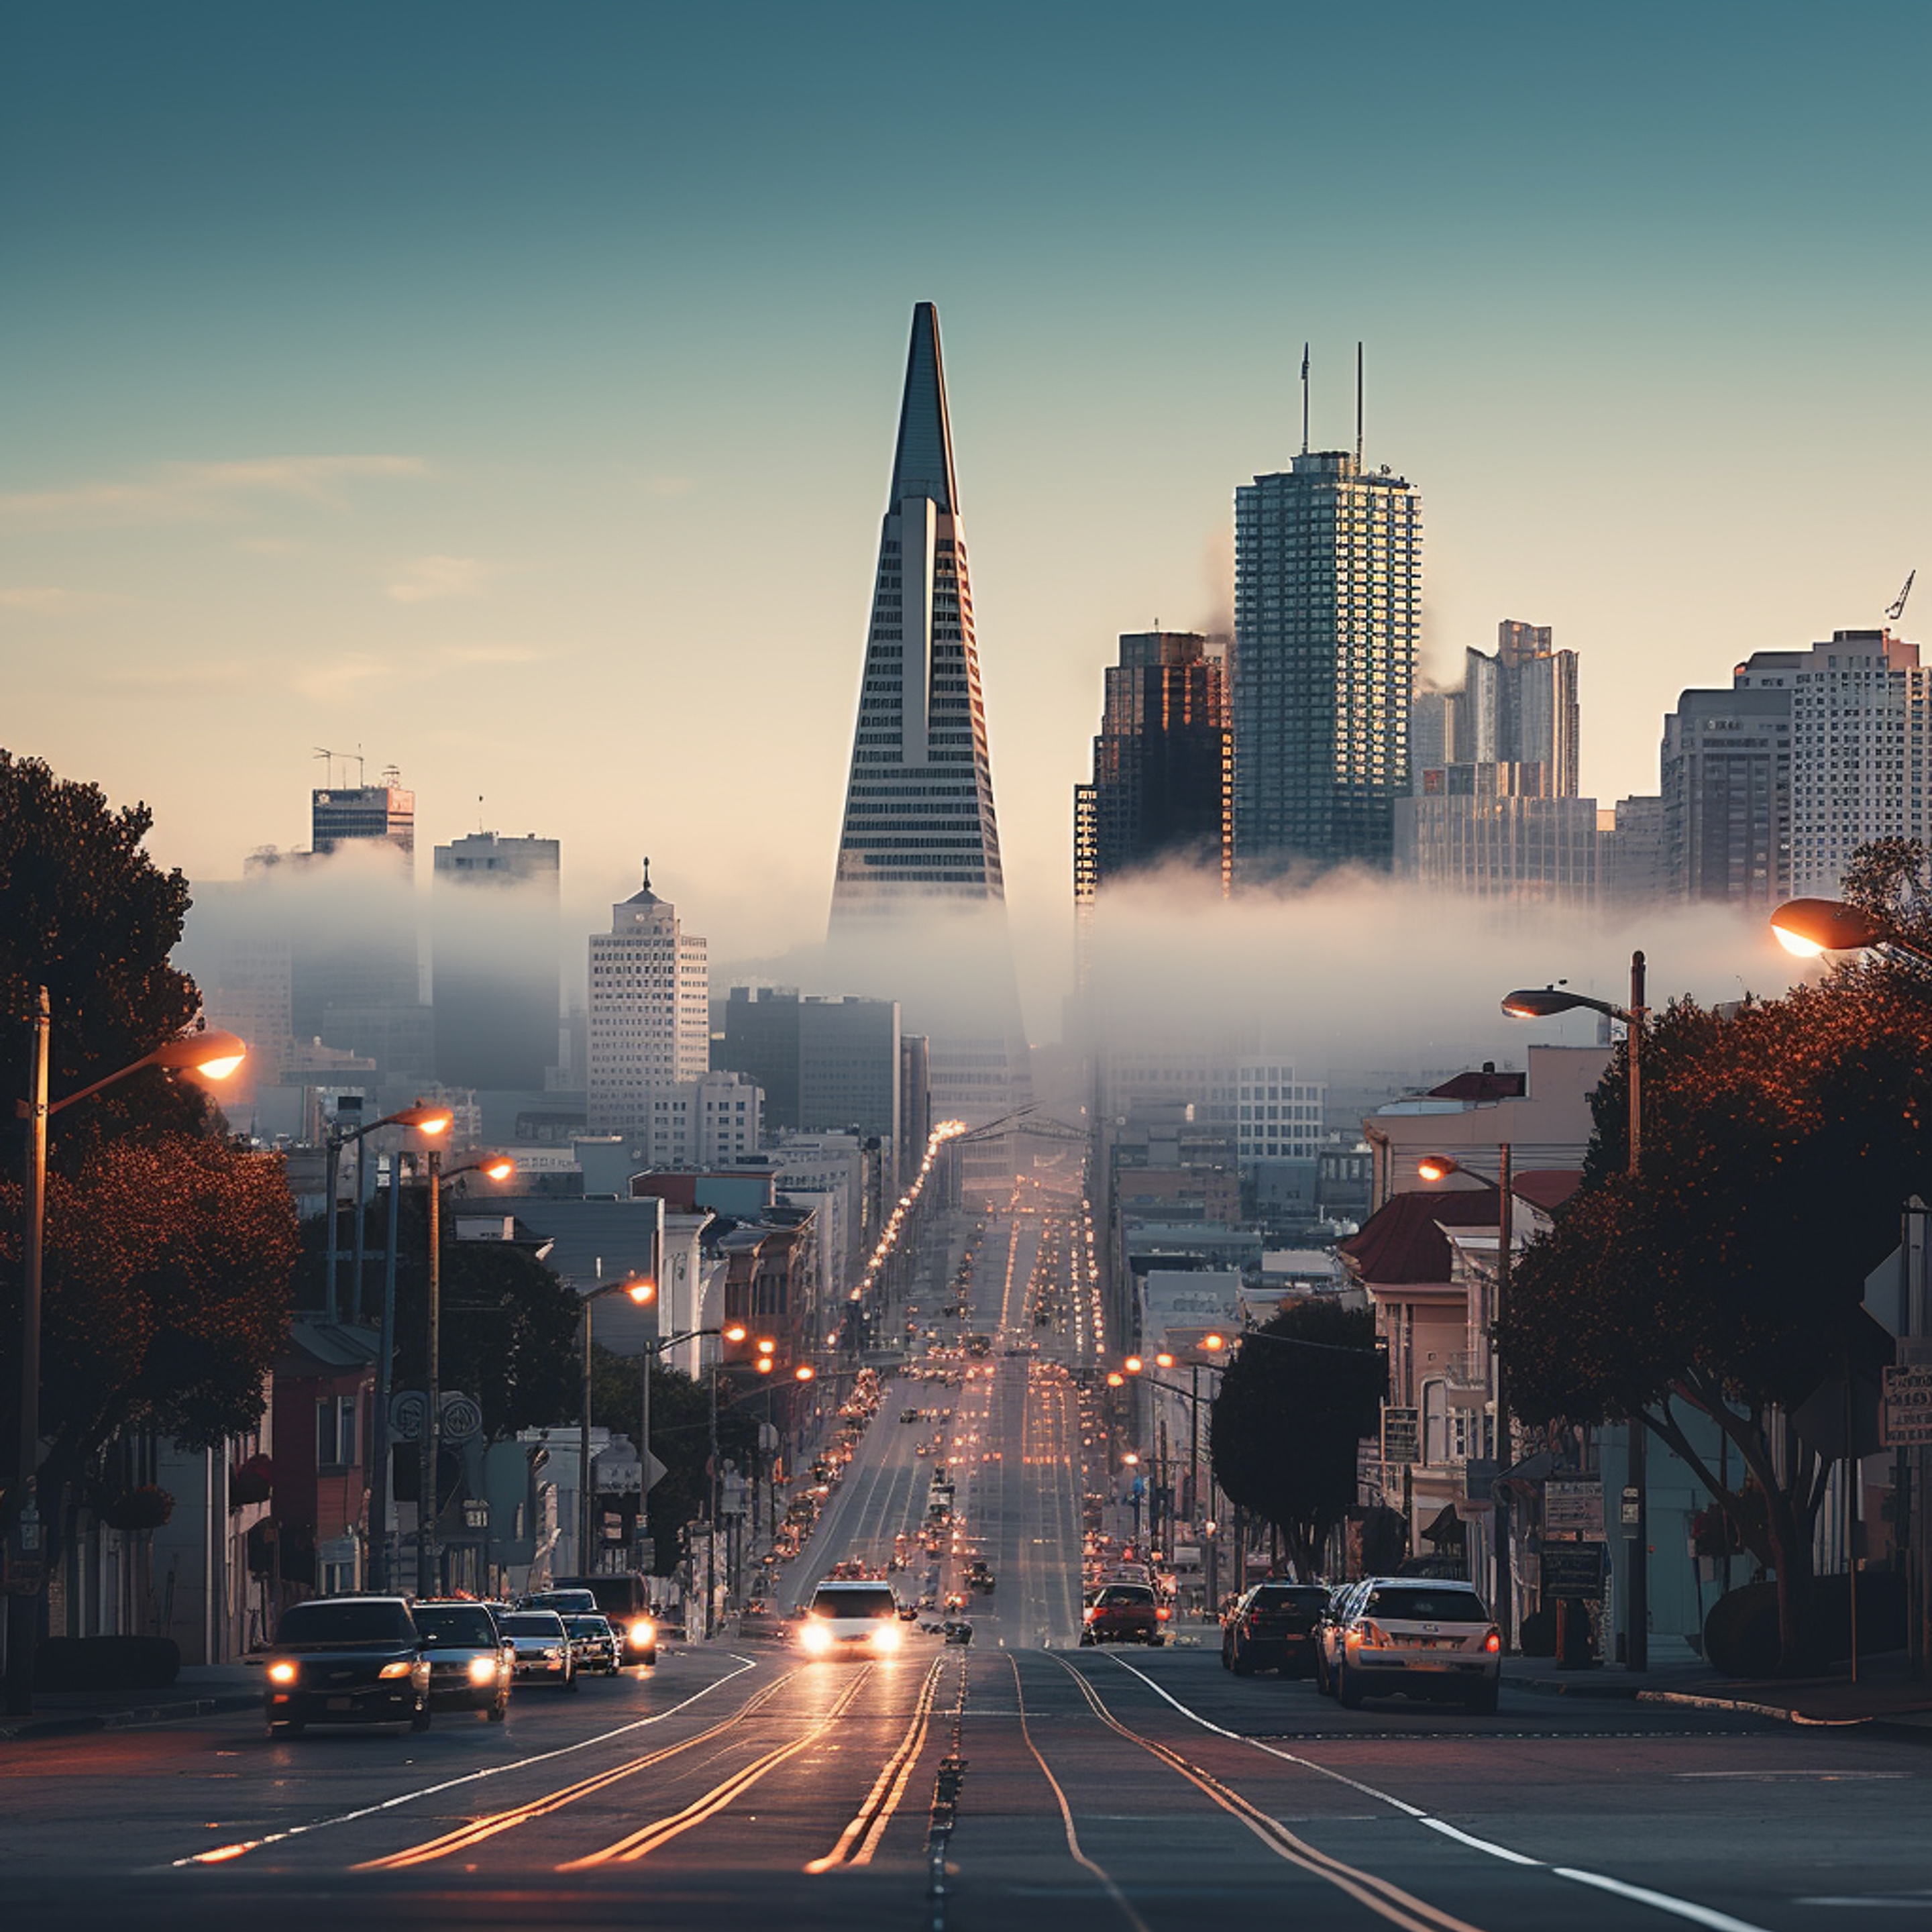 A scenic view of San Francisco at dusk or dawn, with the iconic Transamerica Pyramid centering the composition. Fog, known as the city's natural blanket, gently obscures the lower portions of the skyscrapers.